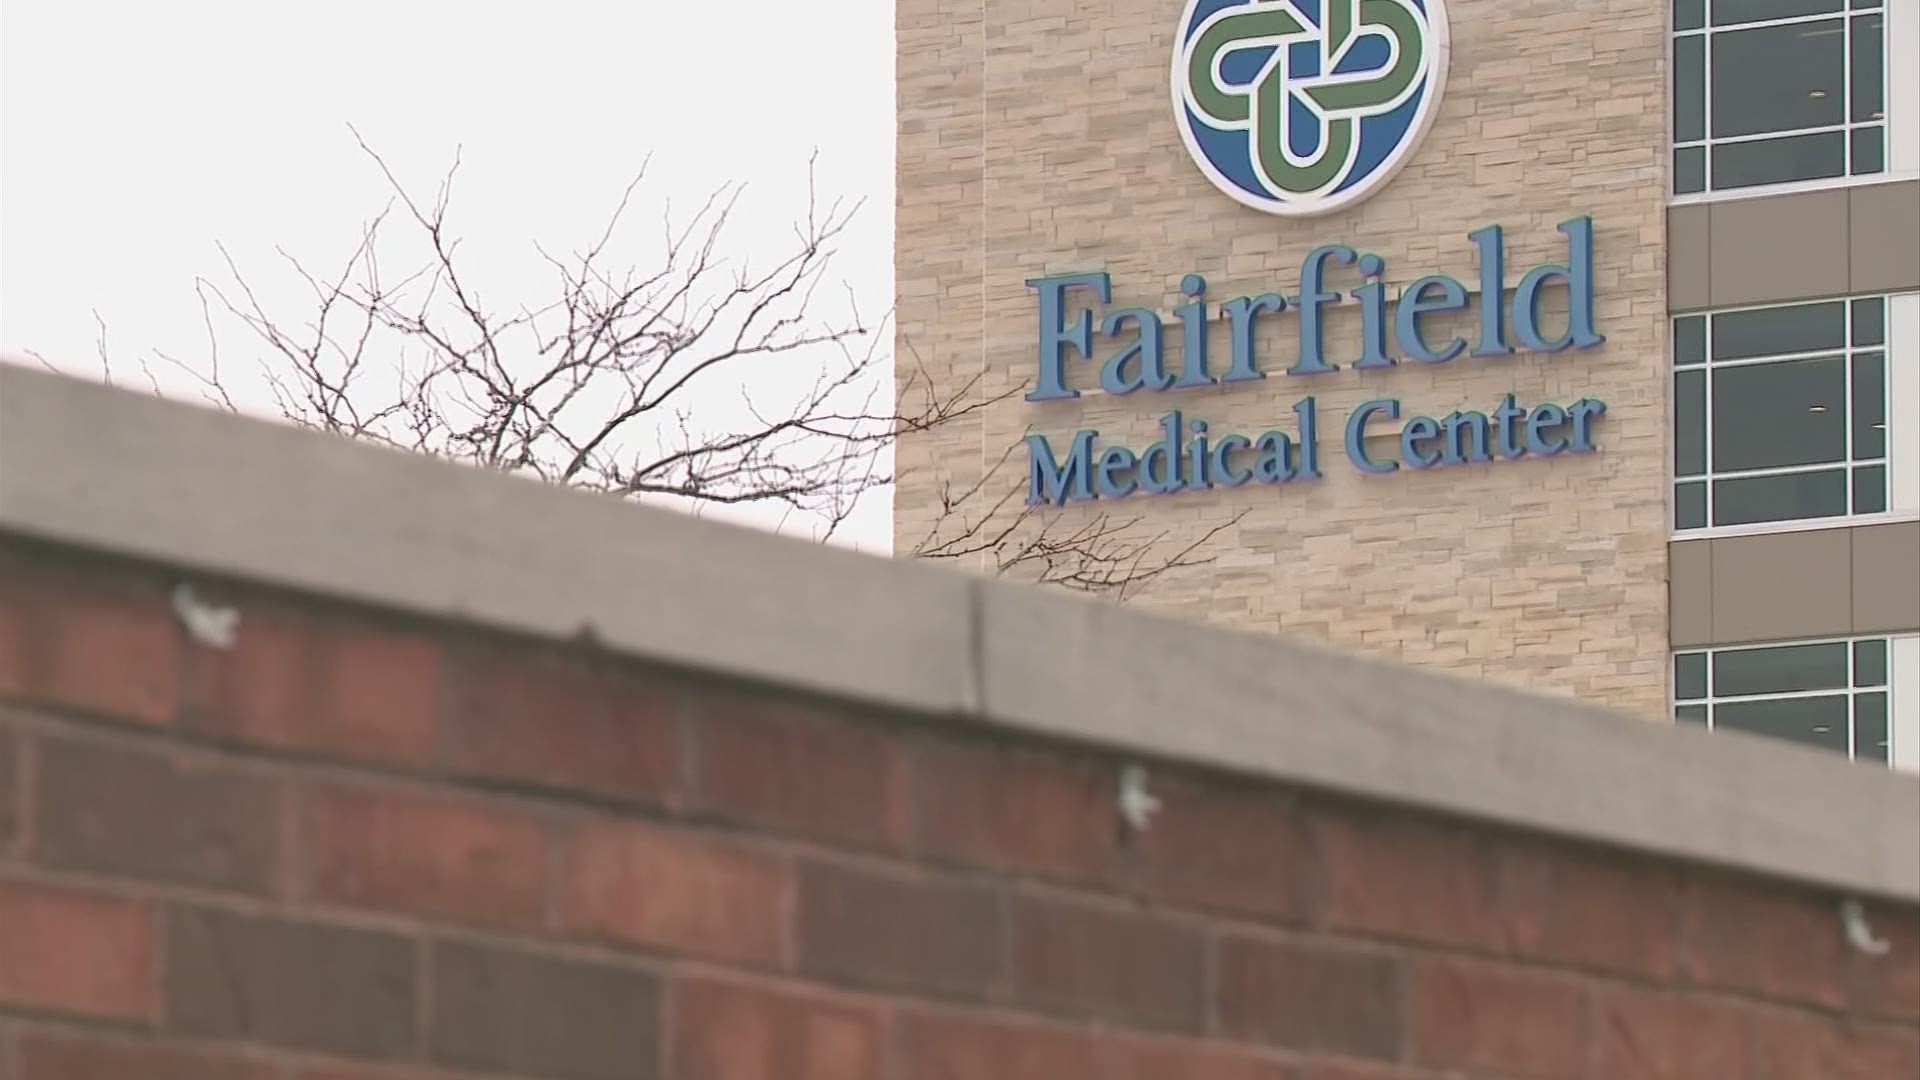 The Fairfield Medical Center CEO says the surge in COVID-19 hospitalizations is putting a strain on his staff.